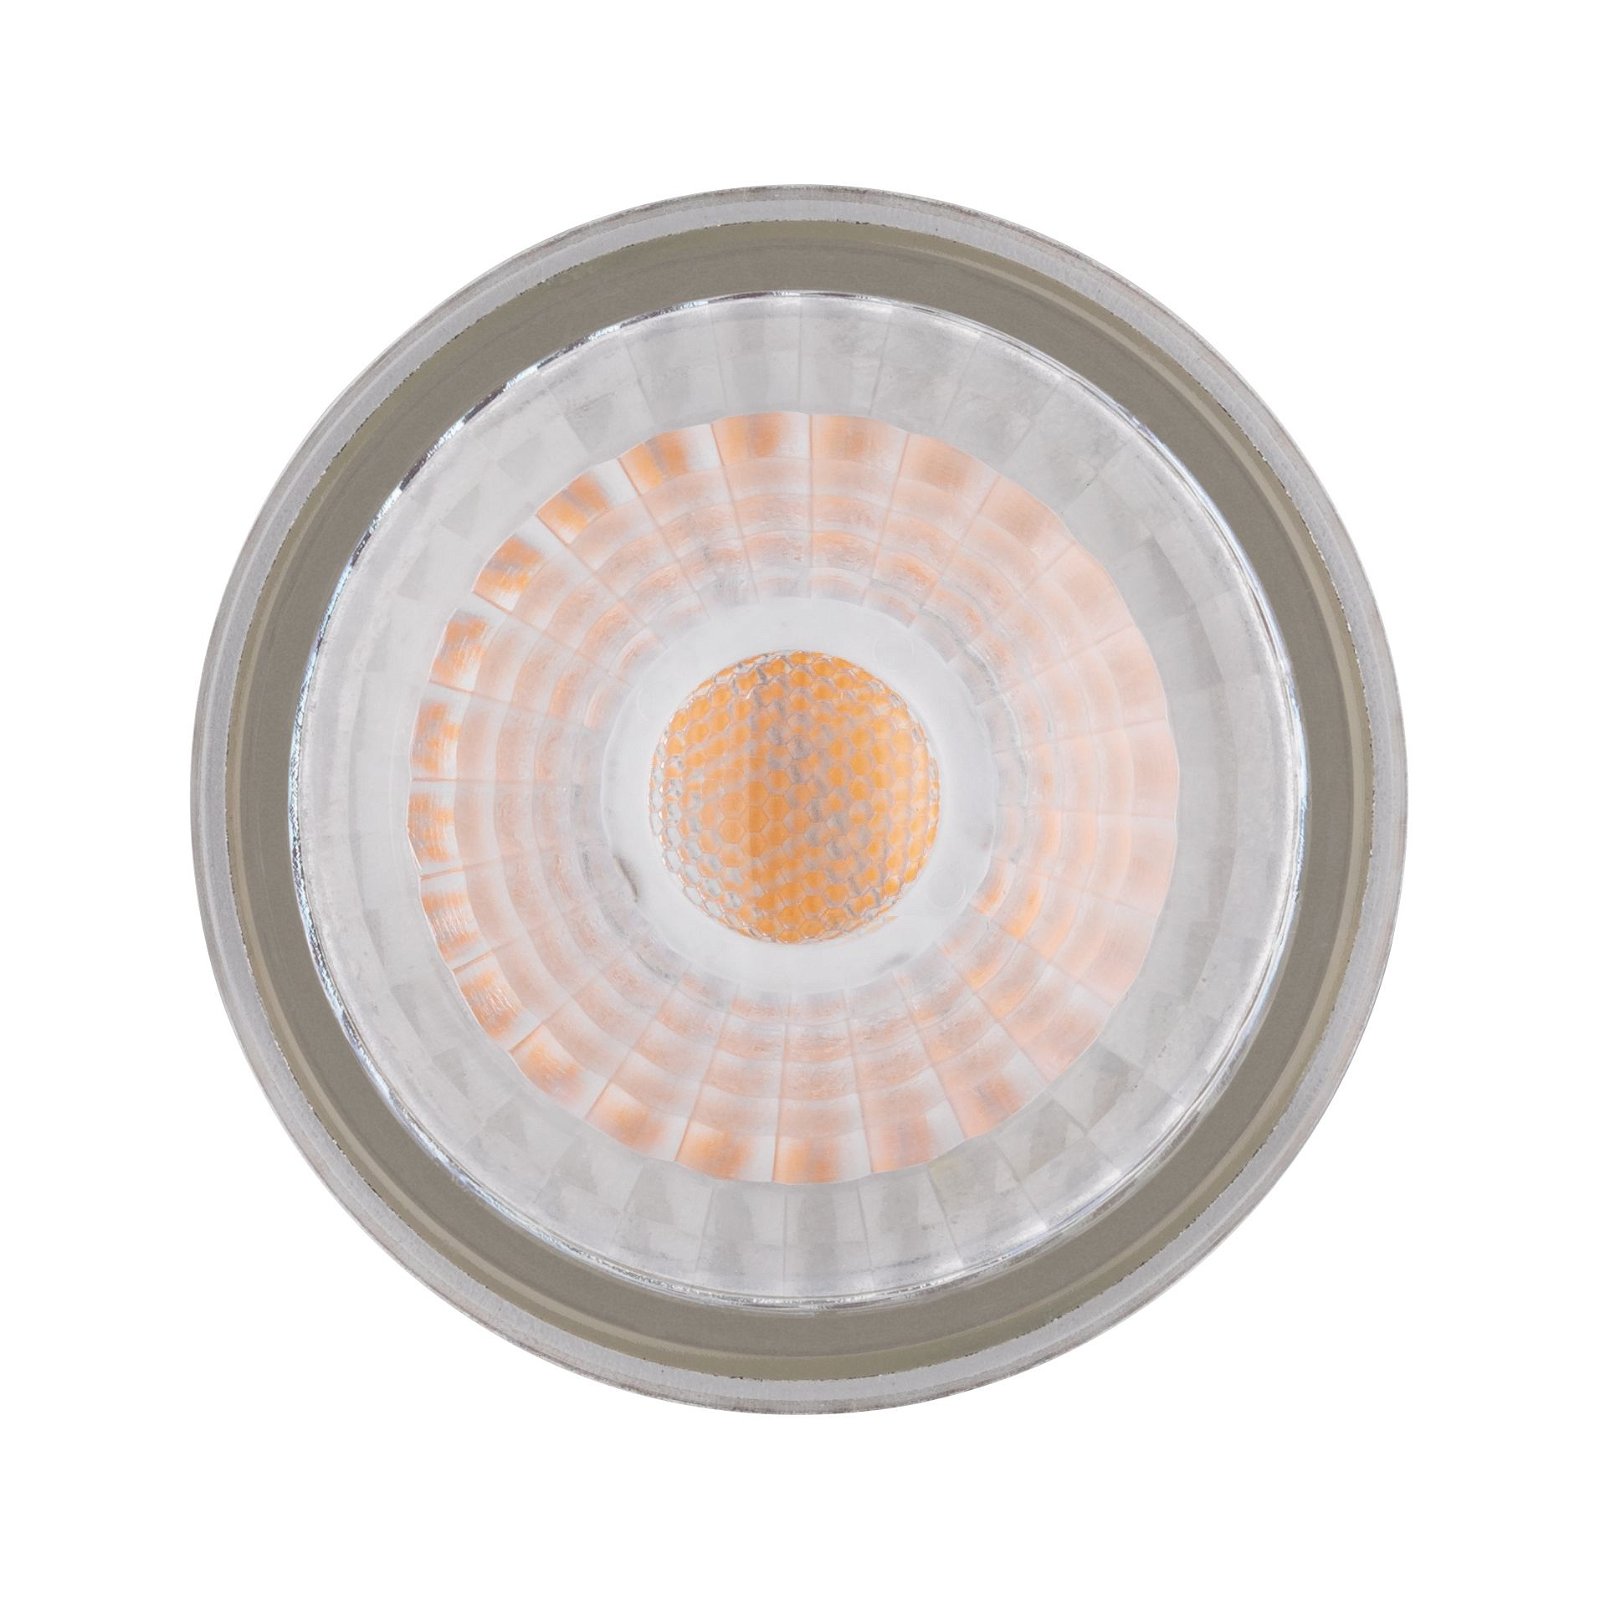 LED glass reflector 5.7W GU10 warm white dimmable